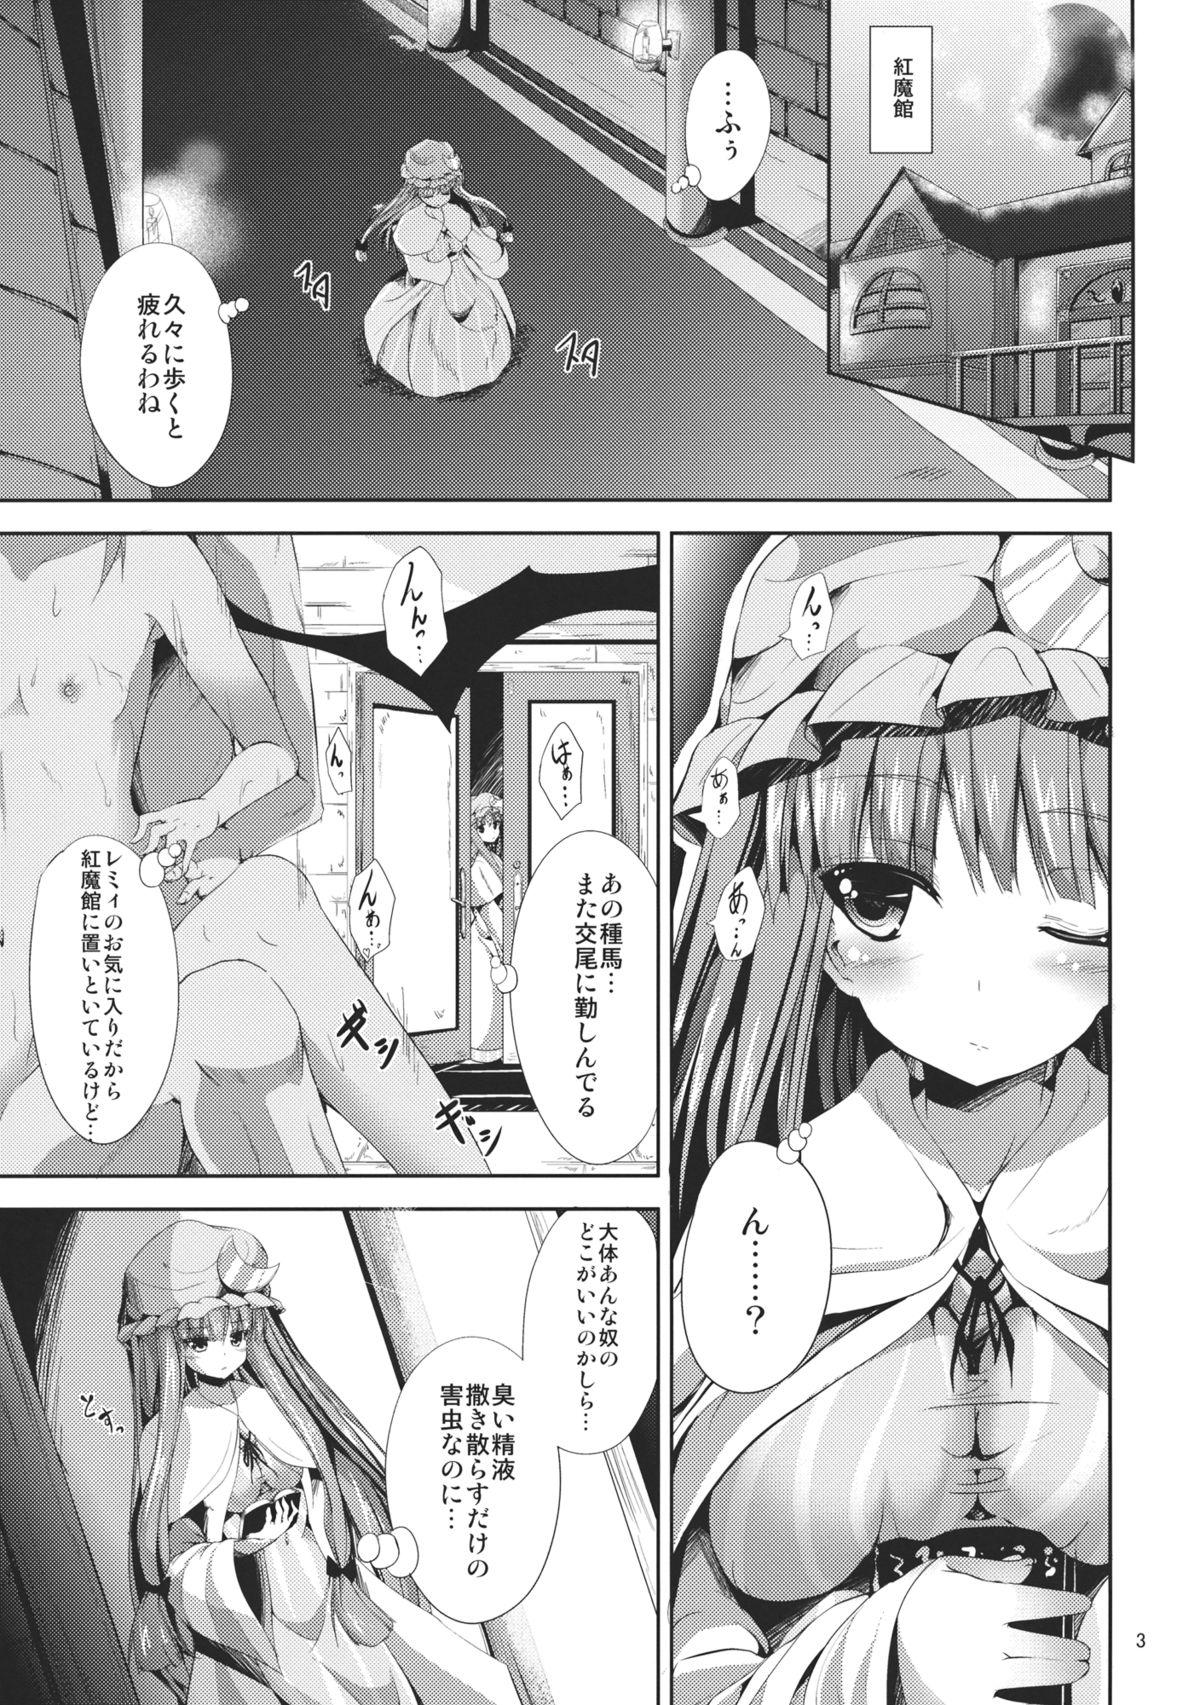 Shaven Sweet nothingS - Touhou project Hottie - Page 3